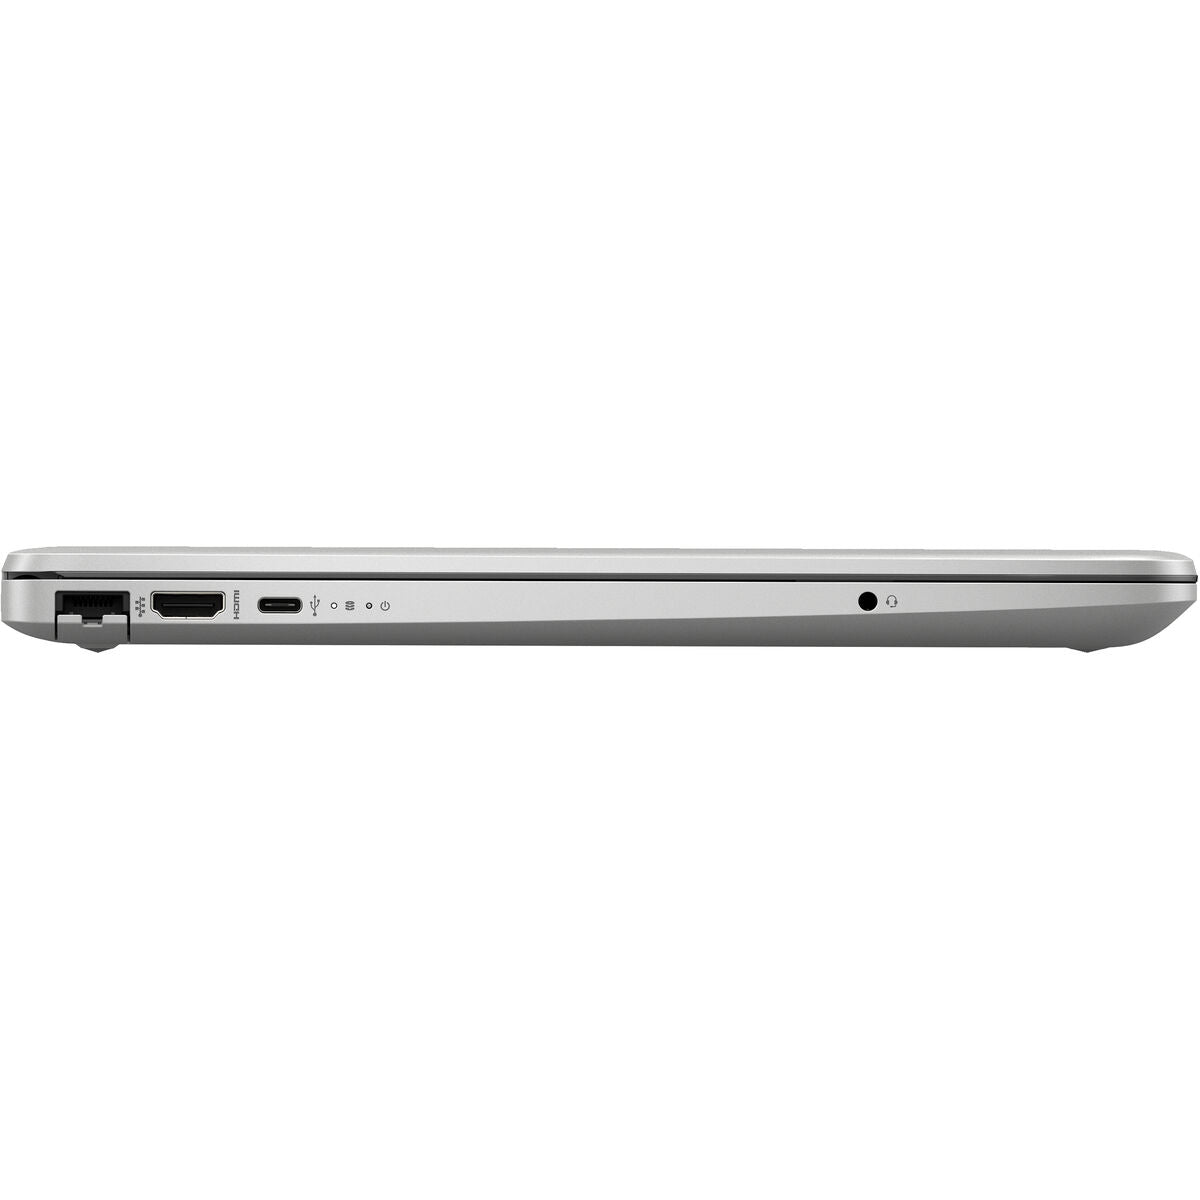 Laptop HP 250 G9 Spanish Qwerty Intel Core i5-1235U 1 TB SSD, HP, Computing, notebook-hp-250-g9-spanish-qwerty-1-tb-ssd-16-gb-ram-intel-core-i5-1235u, :1 TB, :2-in-1, :Intel-i5, :QWERTY, :RAM 16 GB, :Touchscreen, Brand_HP, category-reference-2609, category-reference-2791, category-reference-2797, category-reference-t-19685, Condition_NEW, office, Price_600 - 700, Teleworking, RiotNook